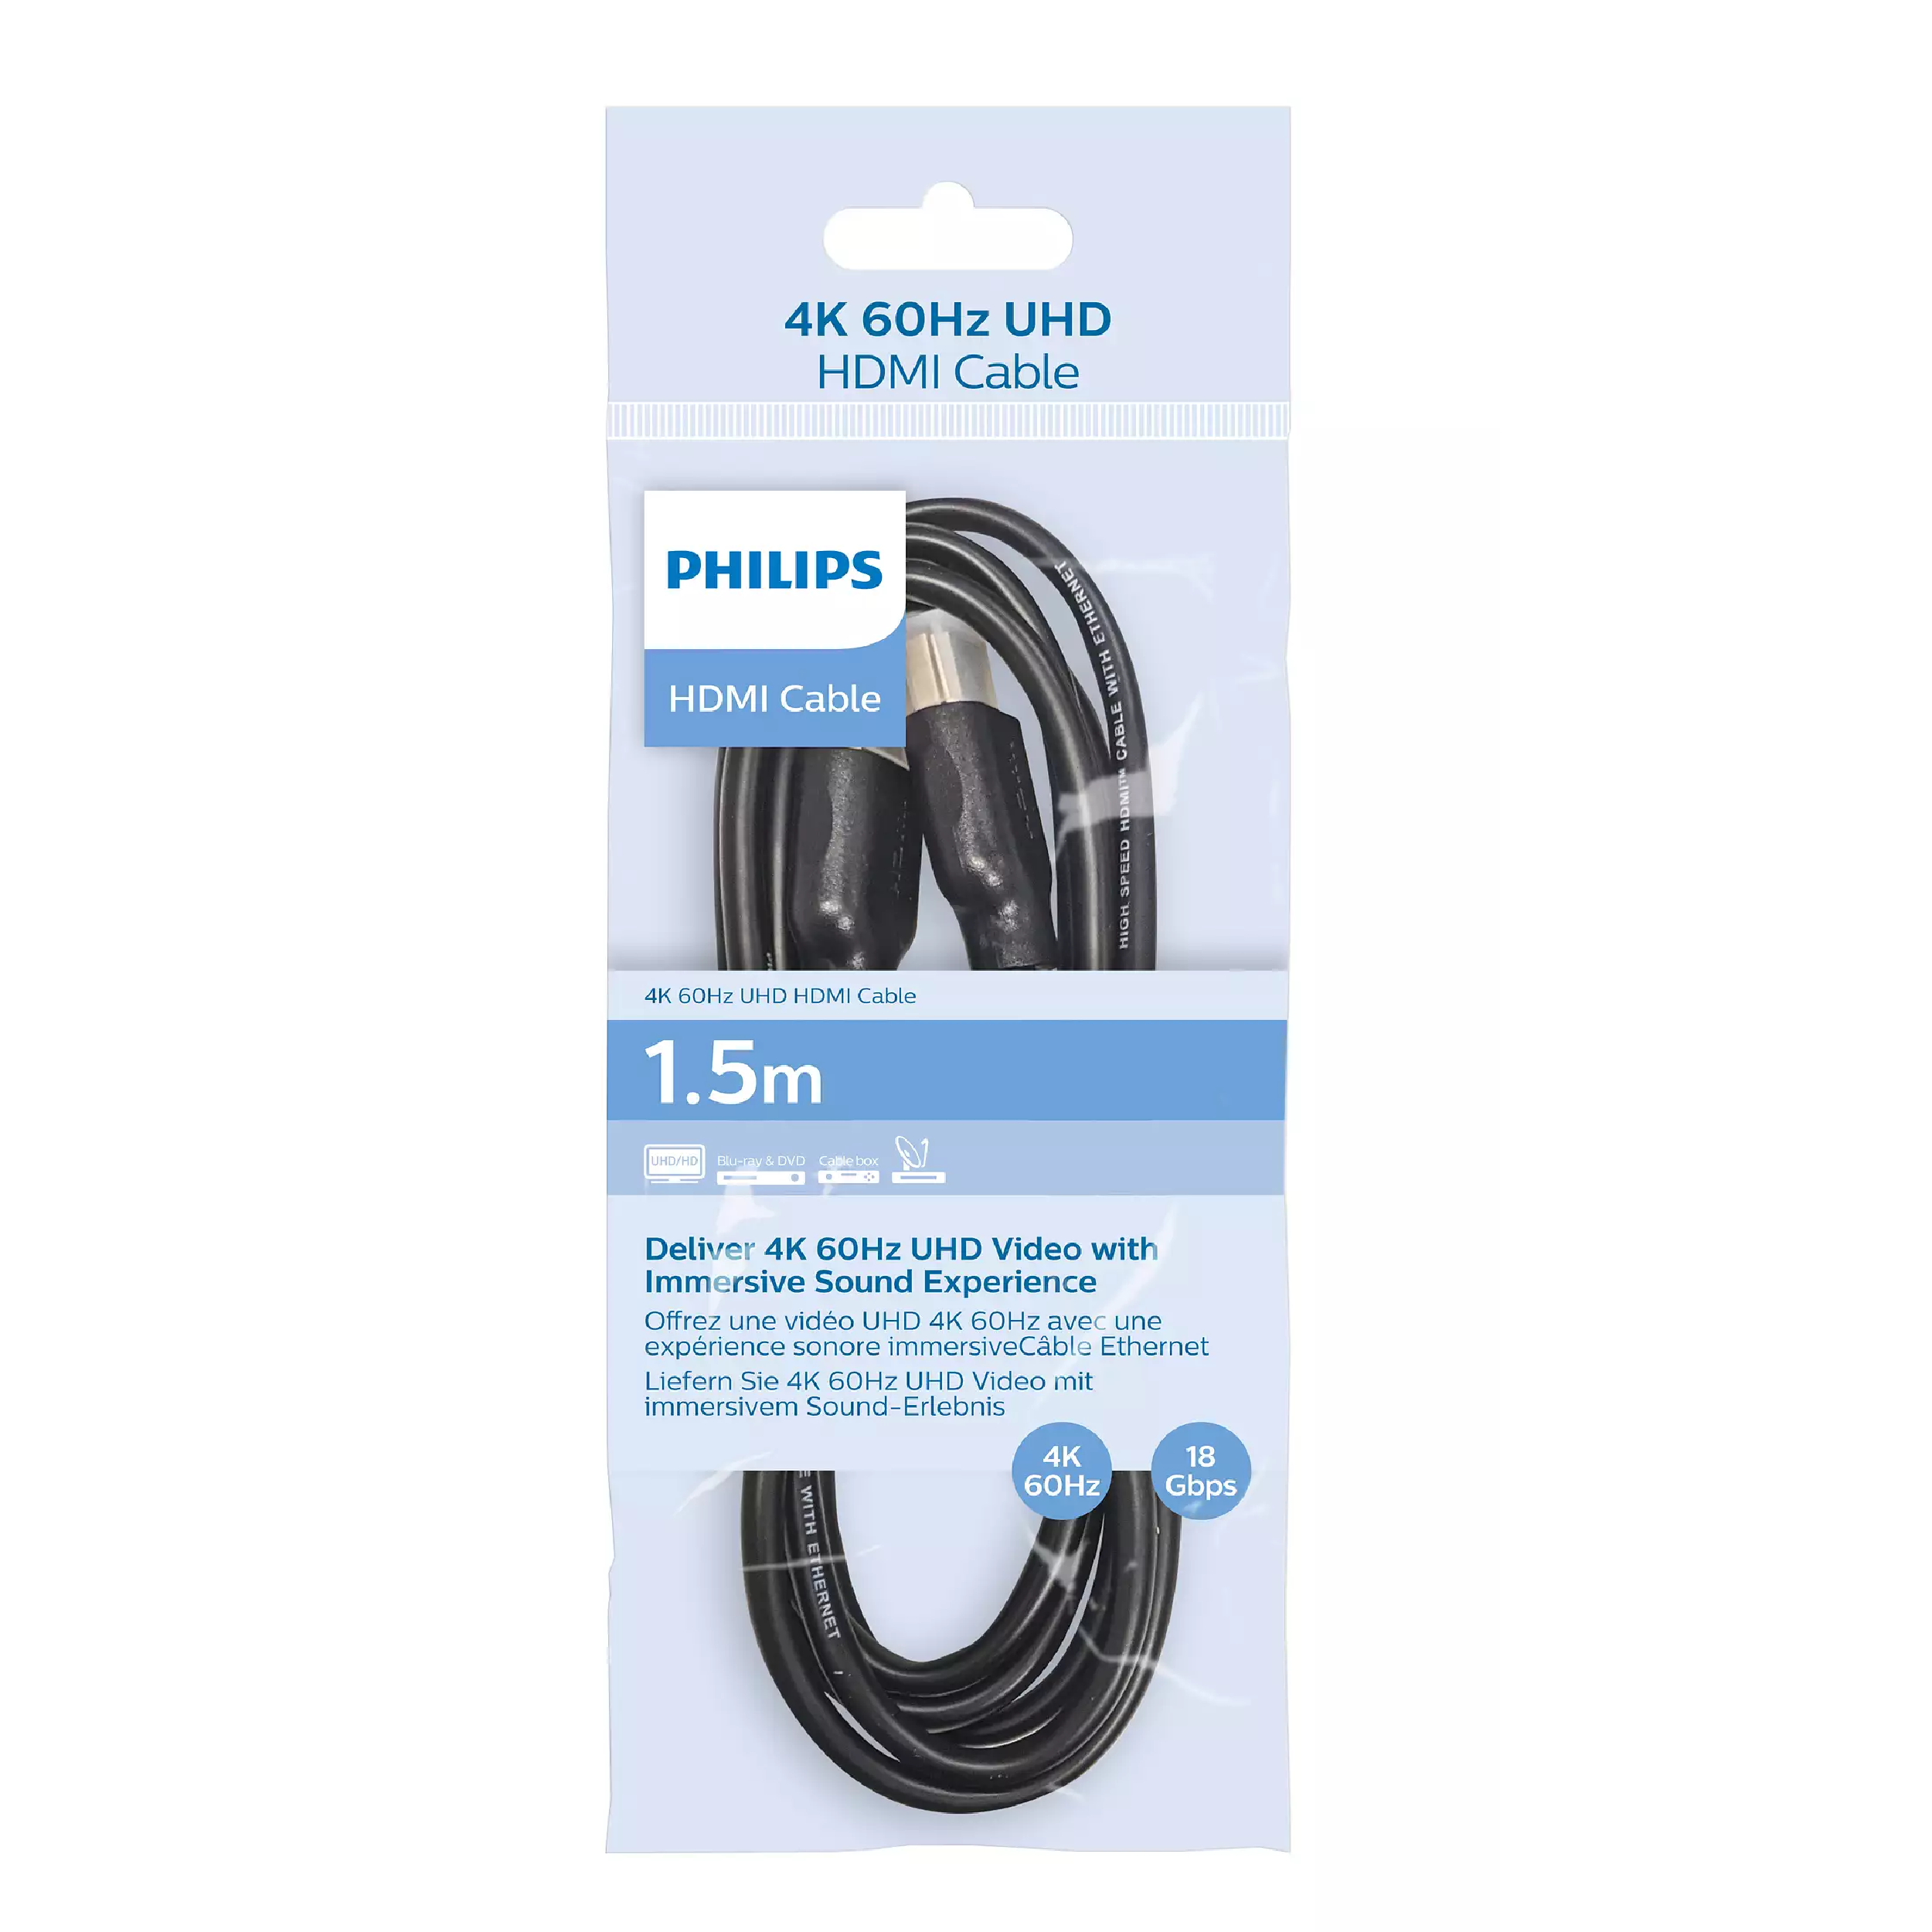 Philips HDMI Cable 4K 60Hz 18 GBPS 1.5M